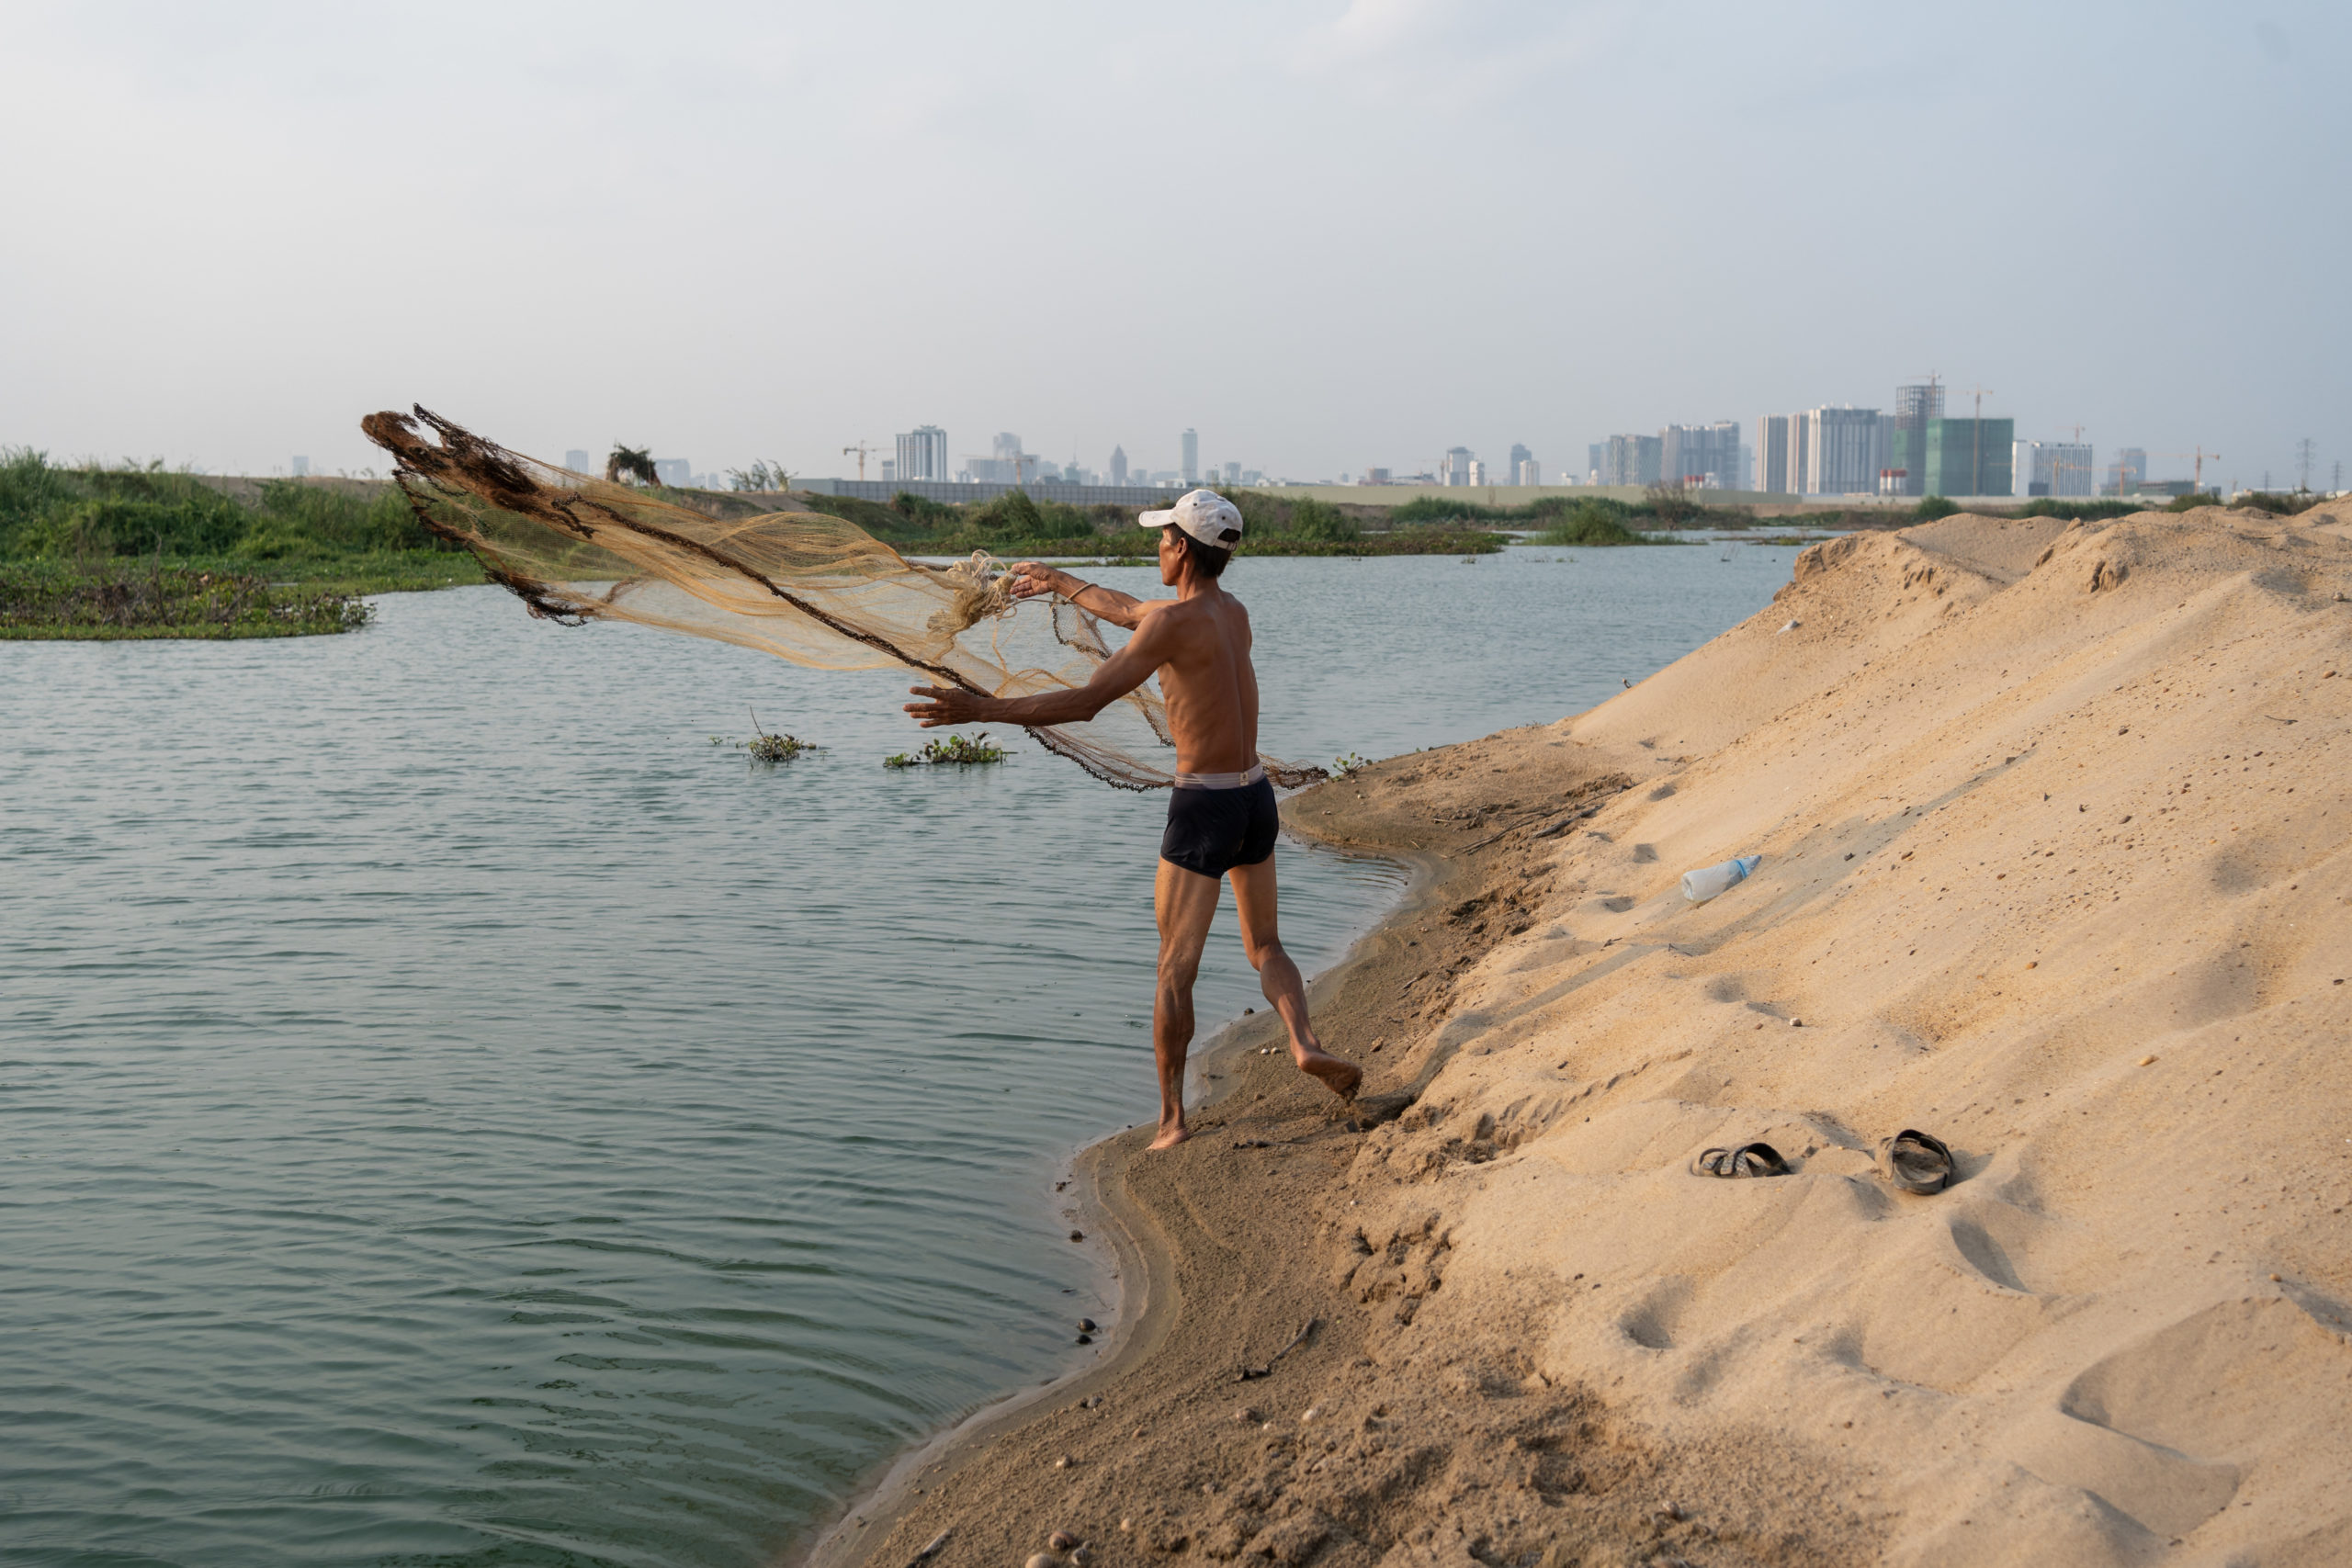 A man attempts to fish in what remains of Boeung Tompoun